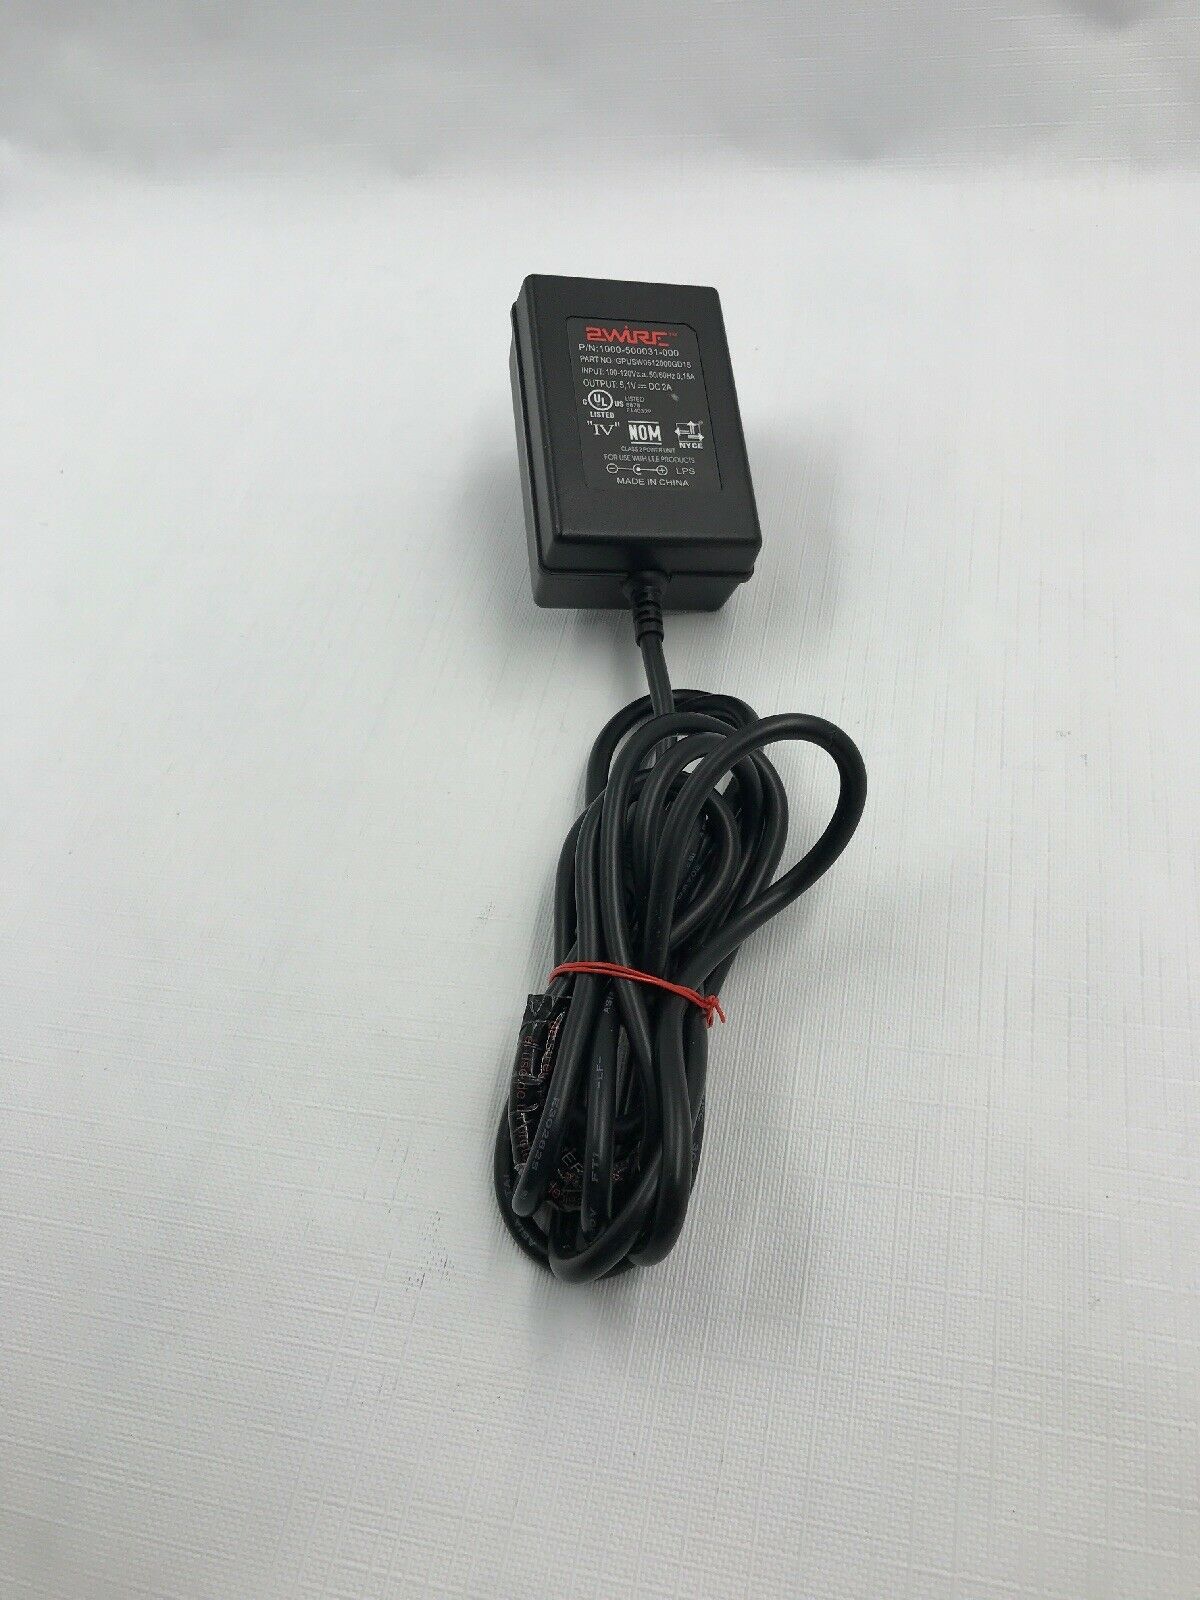 NEW 2Wire GPUSW0512000GD1S 5.1V 2A 1000-500031-000 AC DC Power Supply Adapter Charger for DSL Modem